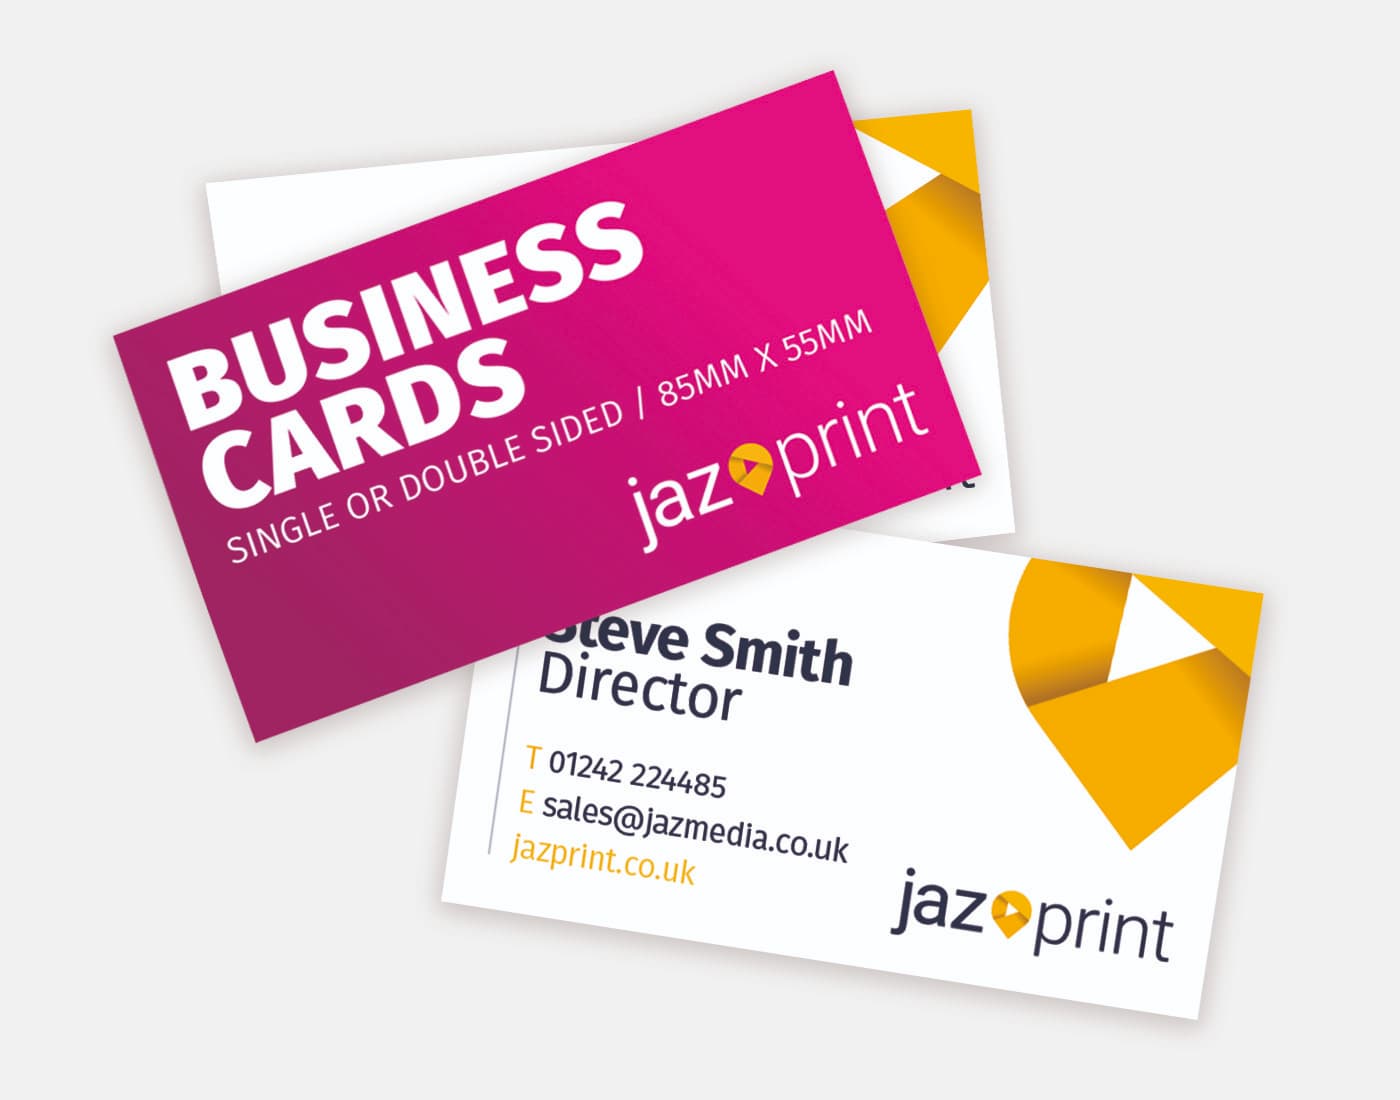 business cards with square or rounded corners. They can be gloss or matt laminated too